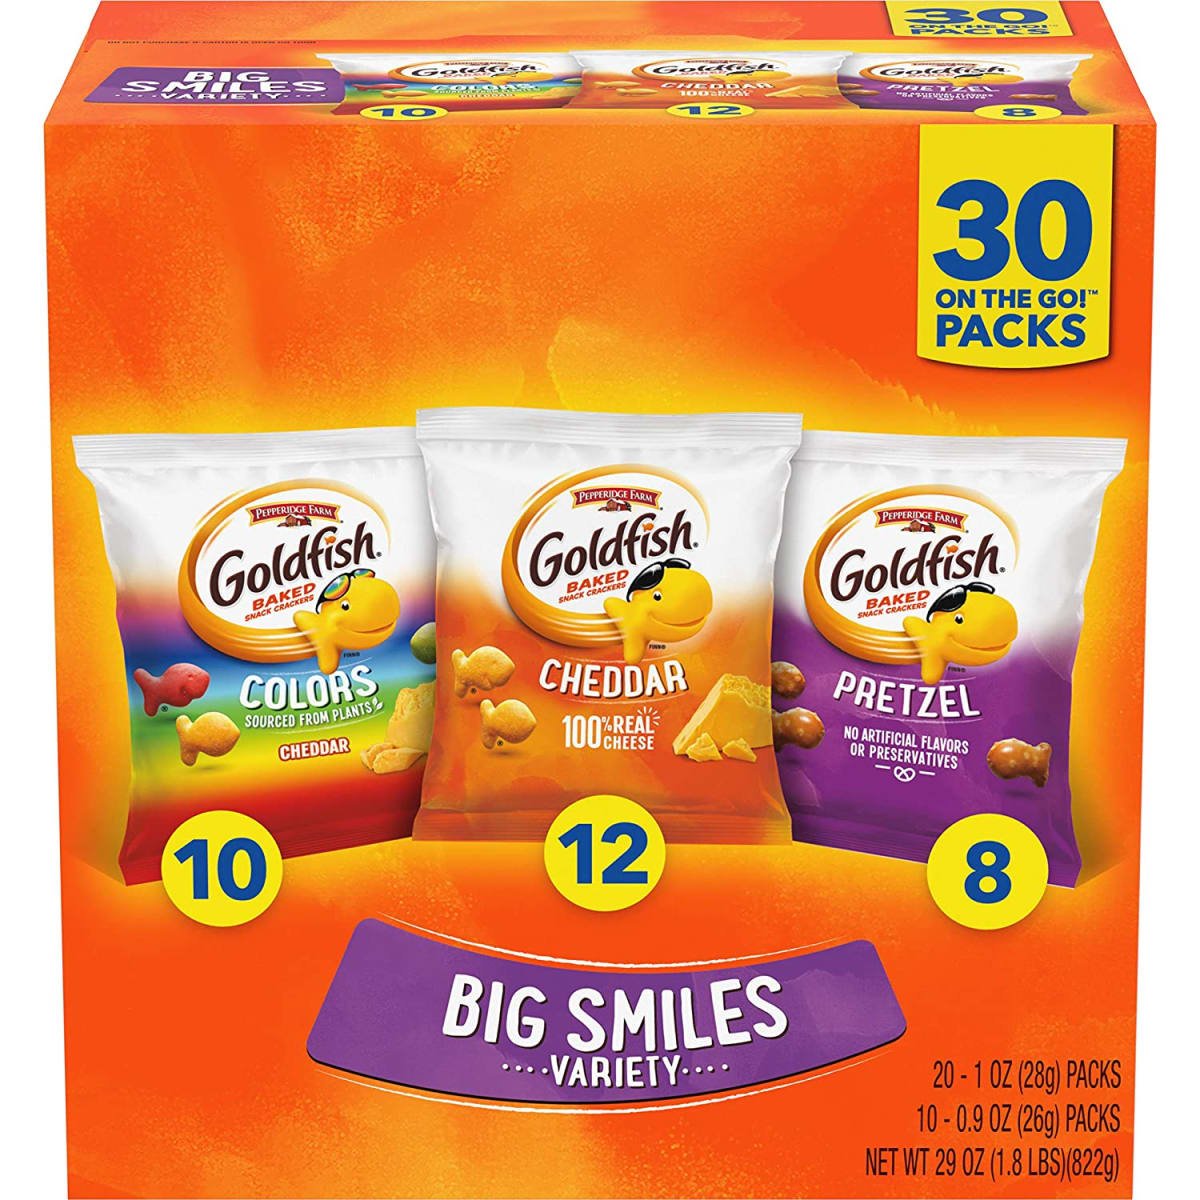 Goldfish Crackers Big Smiles with Cheddar, Colors, and Pretzel Crackers, Snack Packs, 30 CT Variety Pack Box